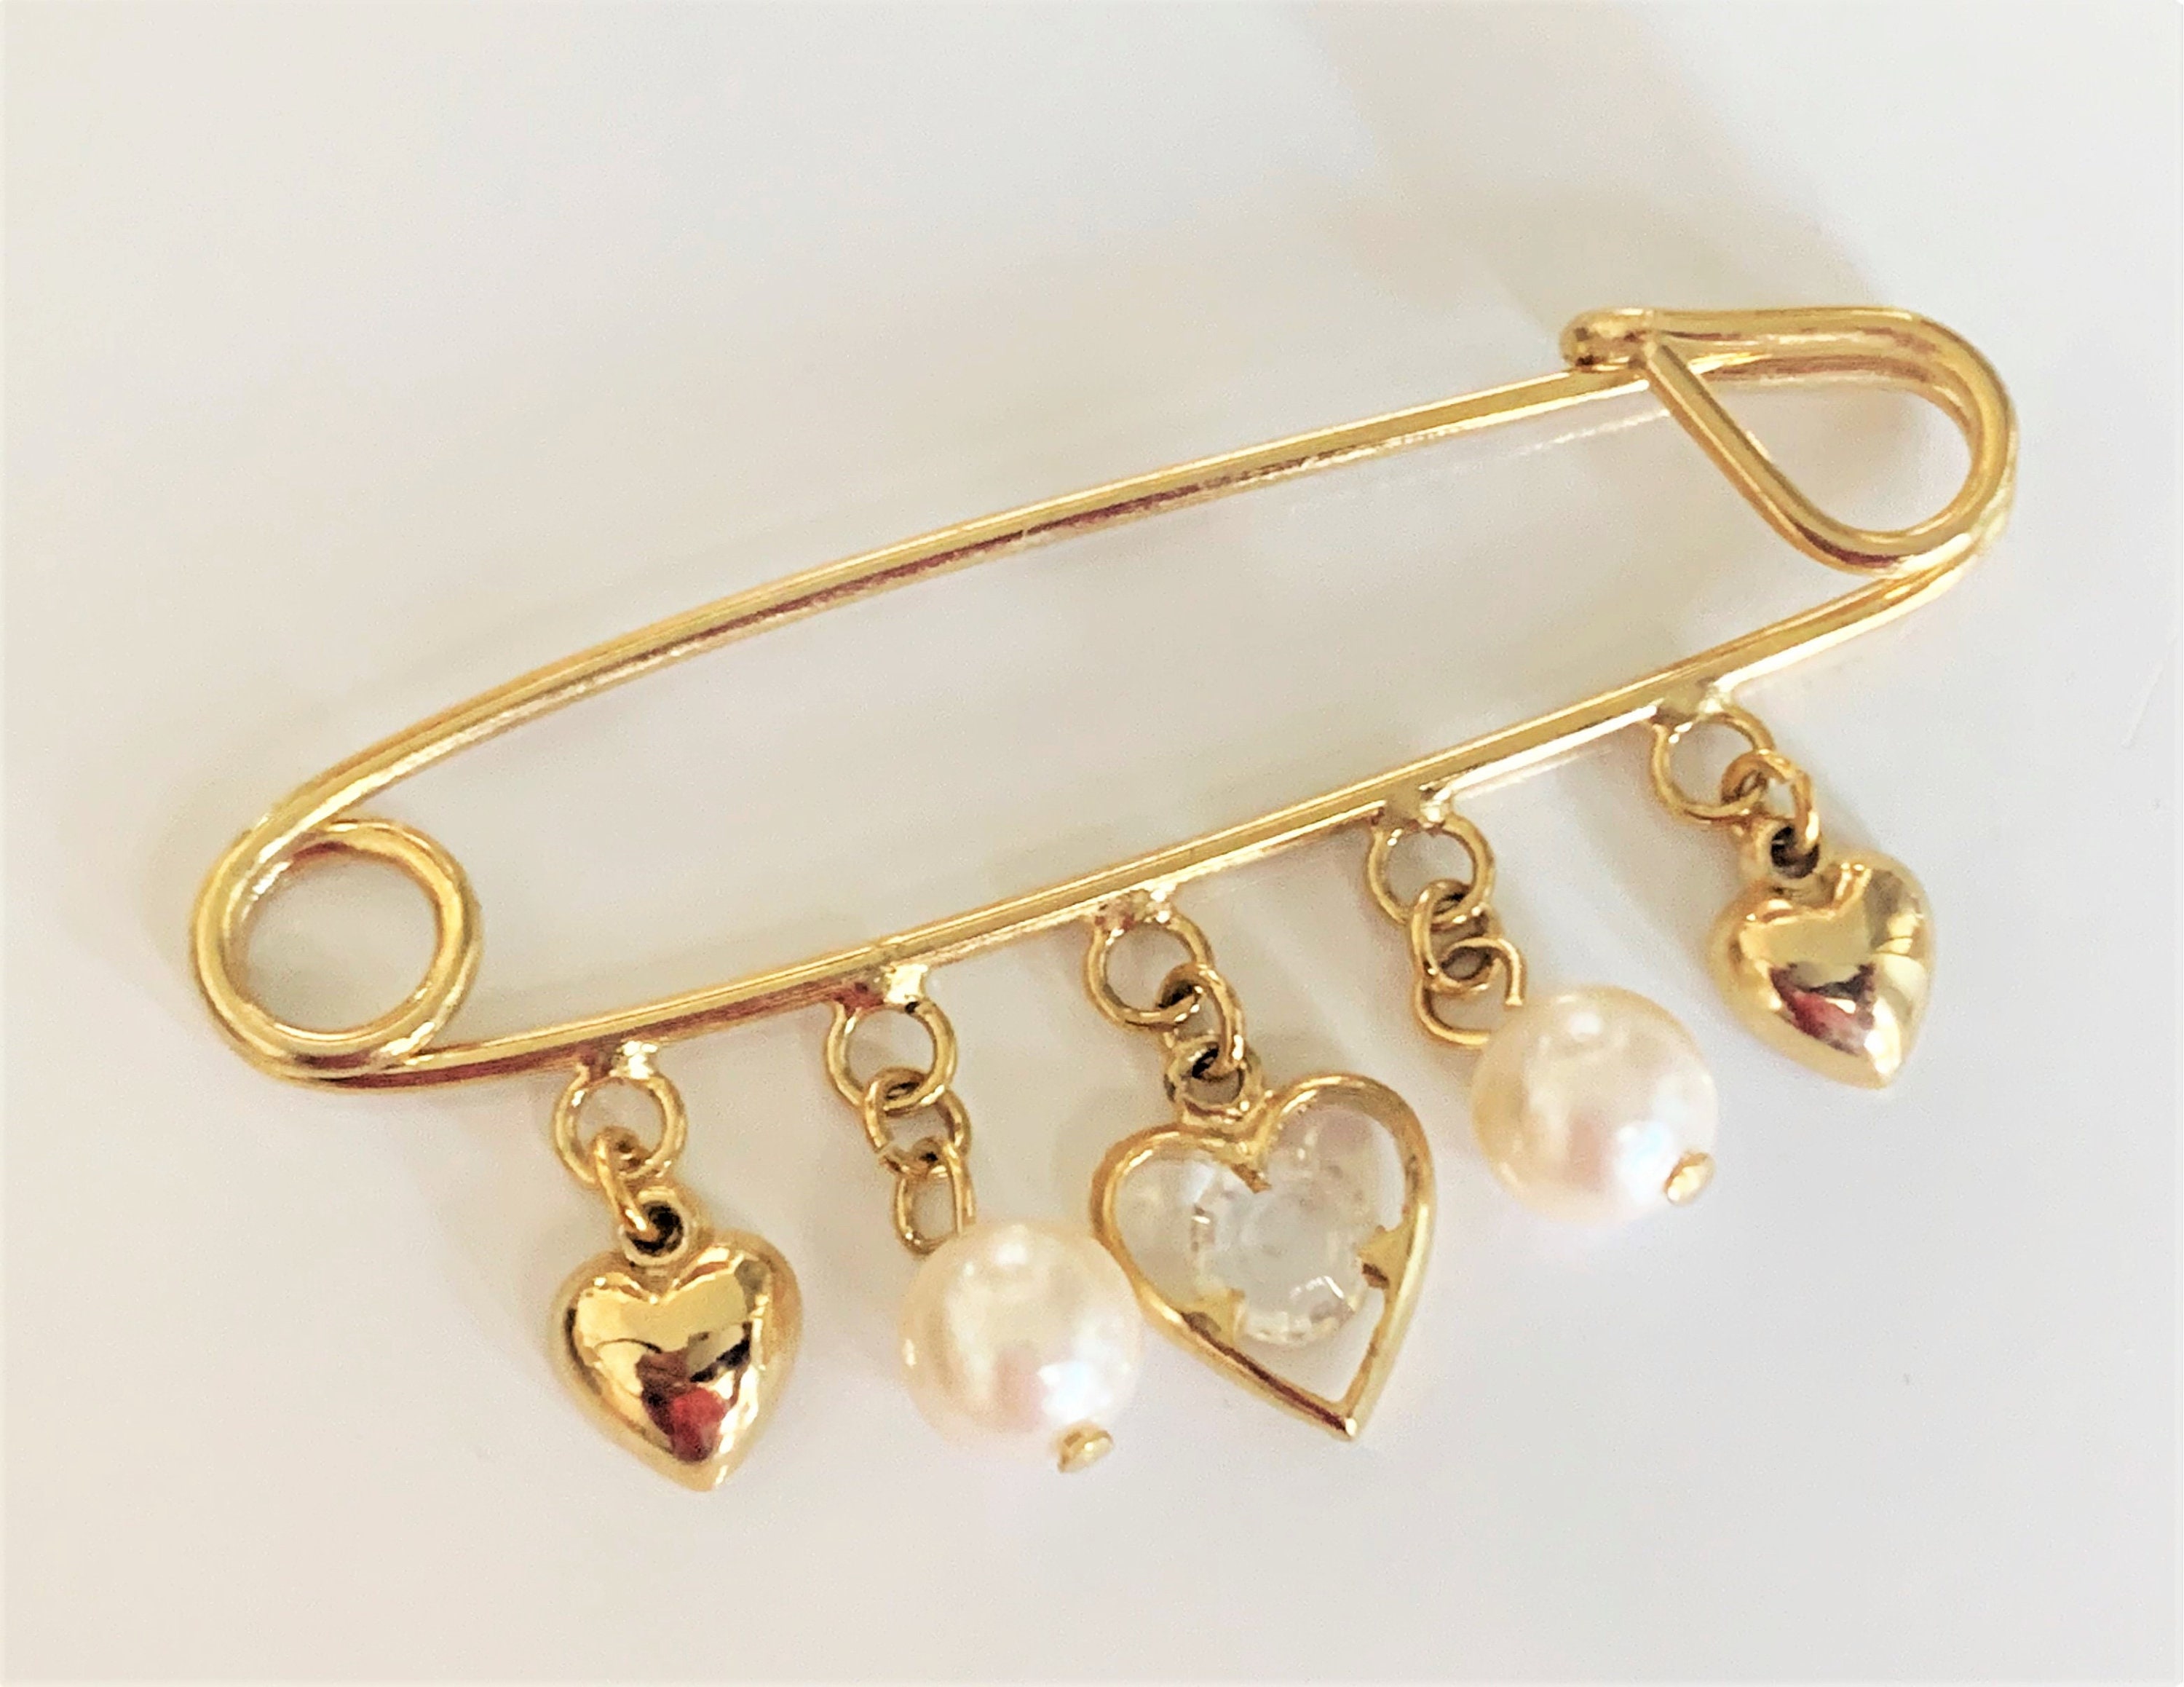 14K Yellow Gold Heart Safety Charm Holder Pin Brooch